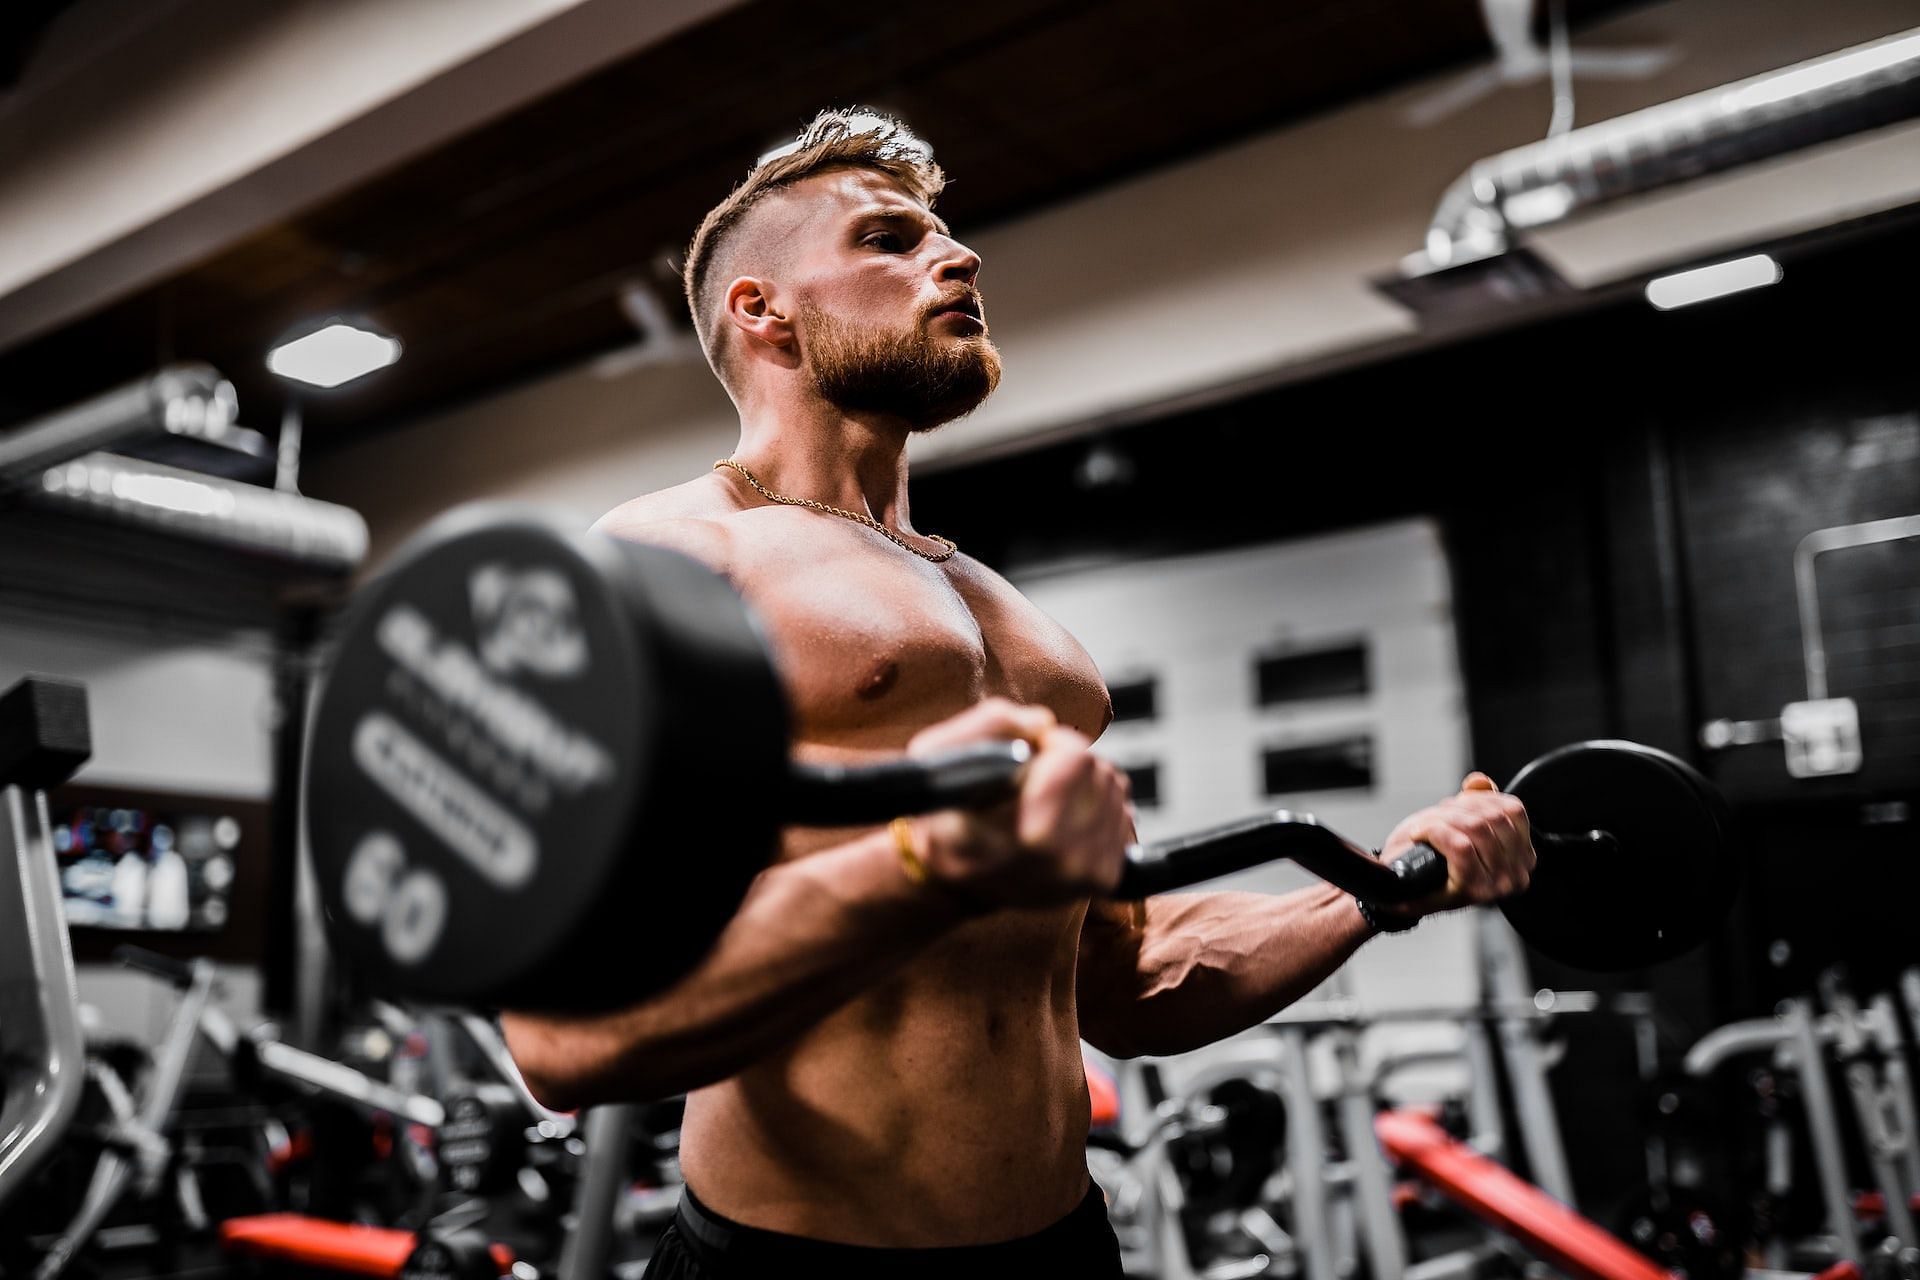 Bicep curl variation exercises for growth and strength. (Photo via Anastase Maragos/Unsplash)